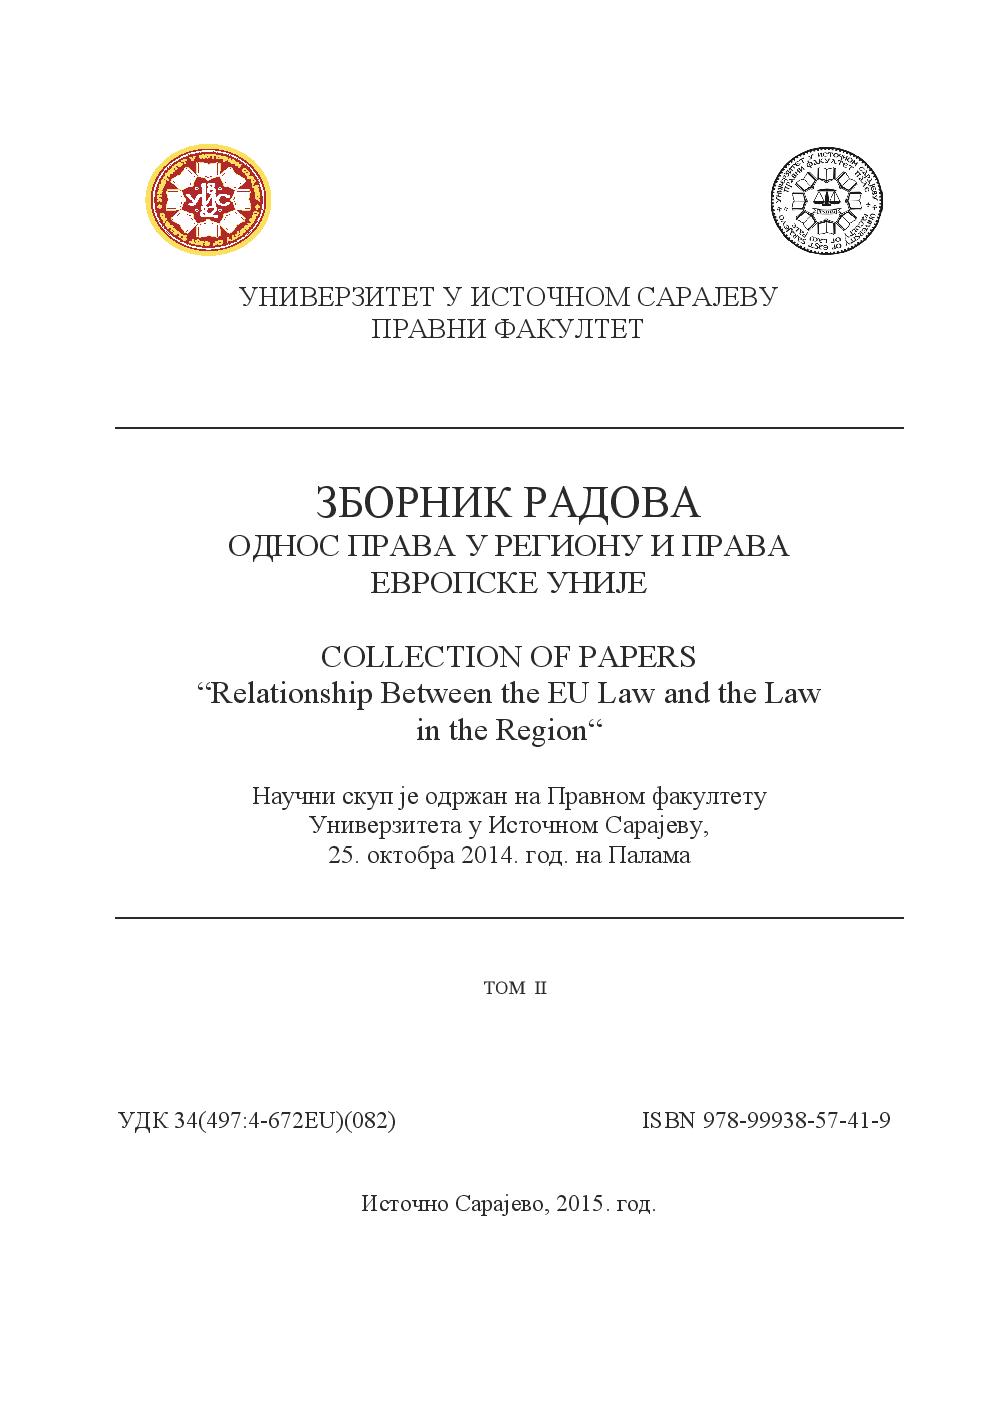 Collection of Papers"Relationship Between the EU and the Law in the Region"Vol II Cover Image